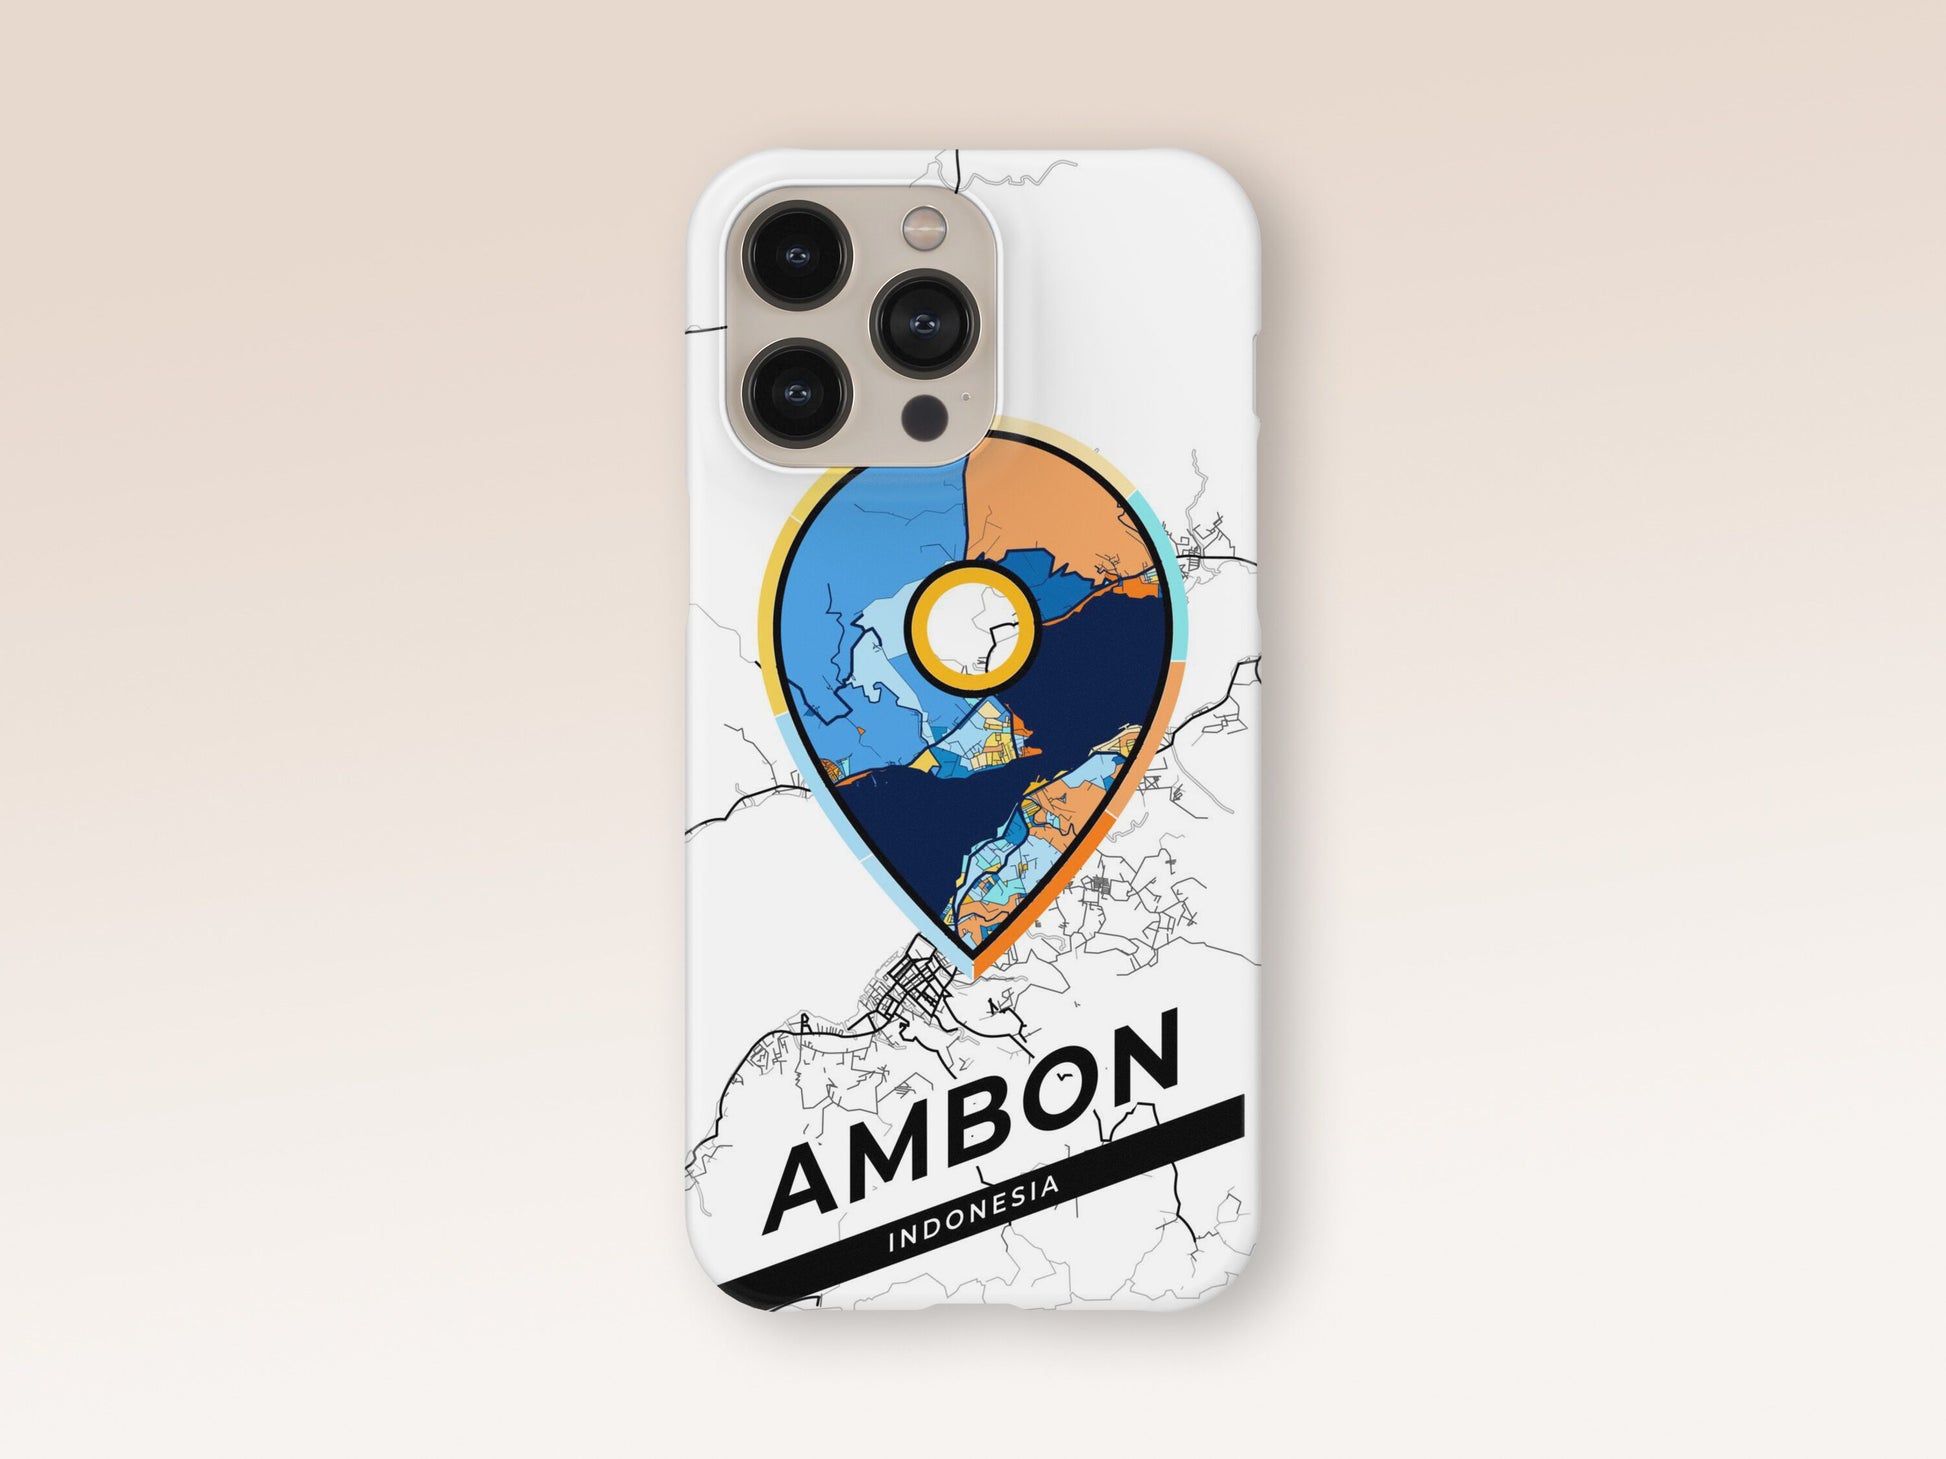 Ambon Indonesia slim phone case with colorful icon. Birthday, wedding or housewarming gift. Couple match cases. 1